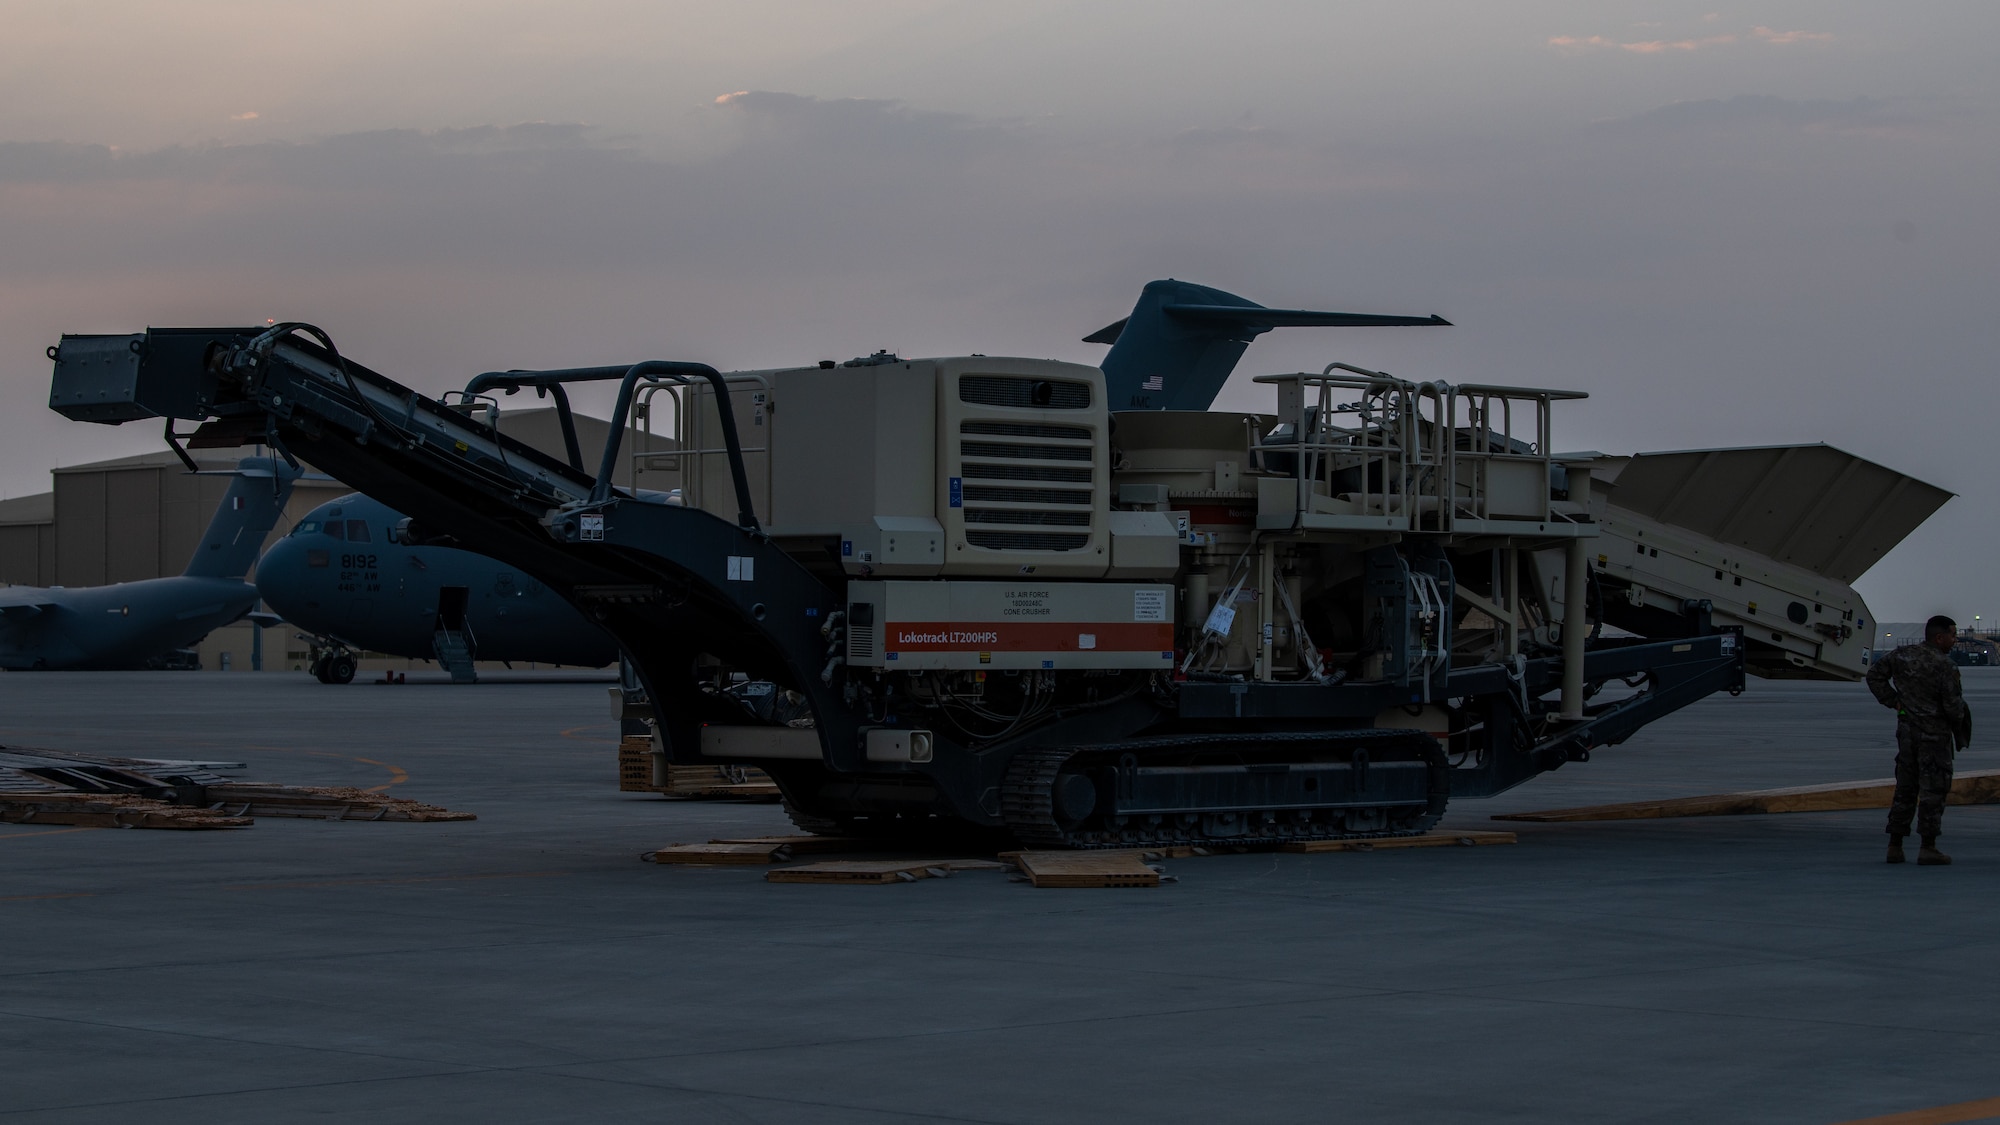 Rock crusher prepares to be loaded on C-5 Galaxy